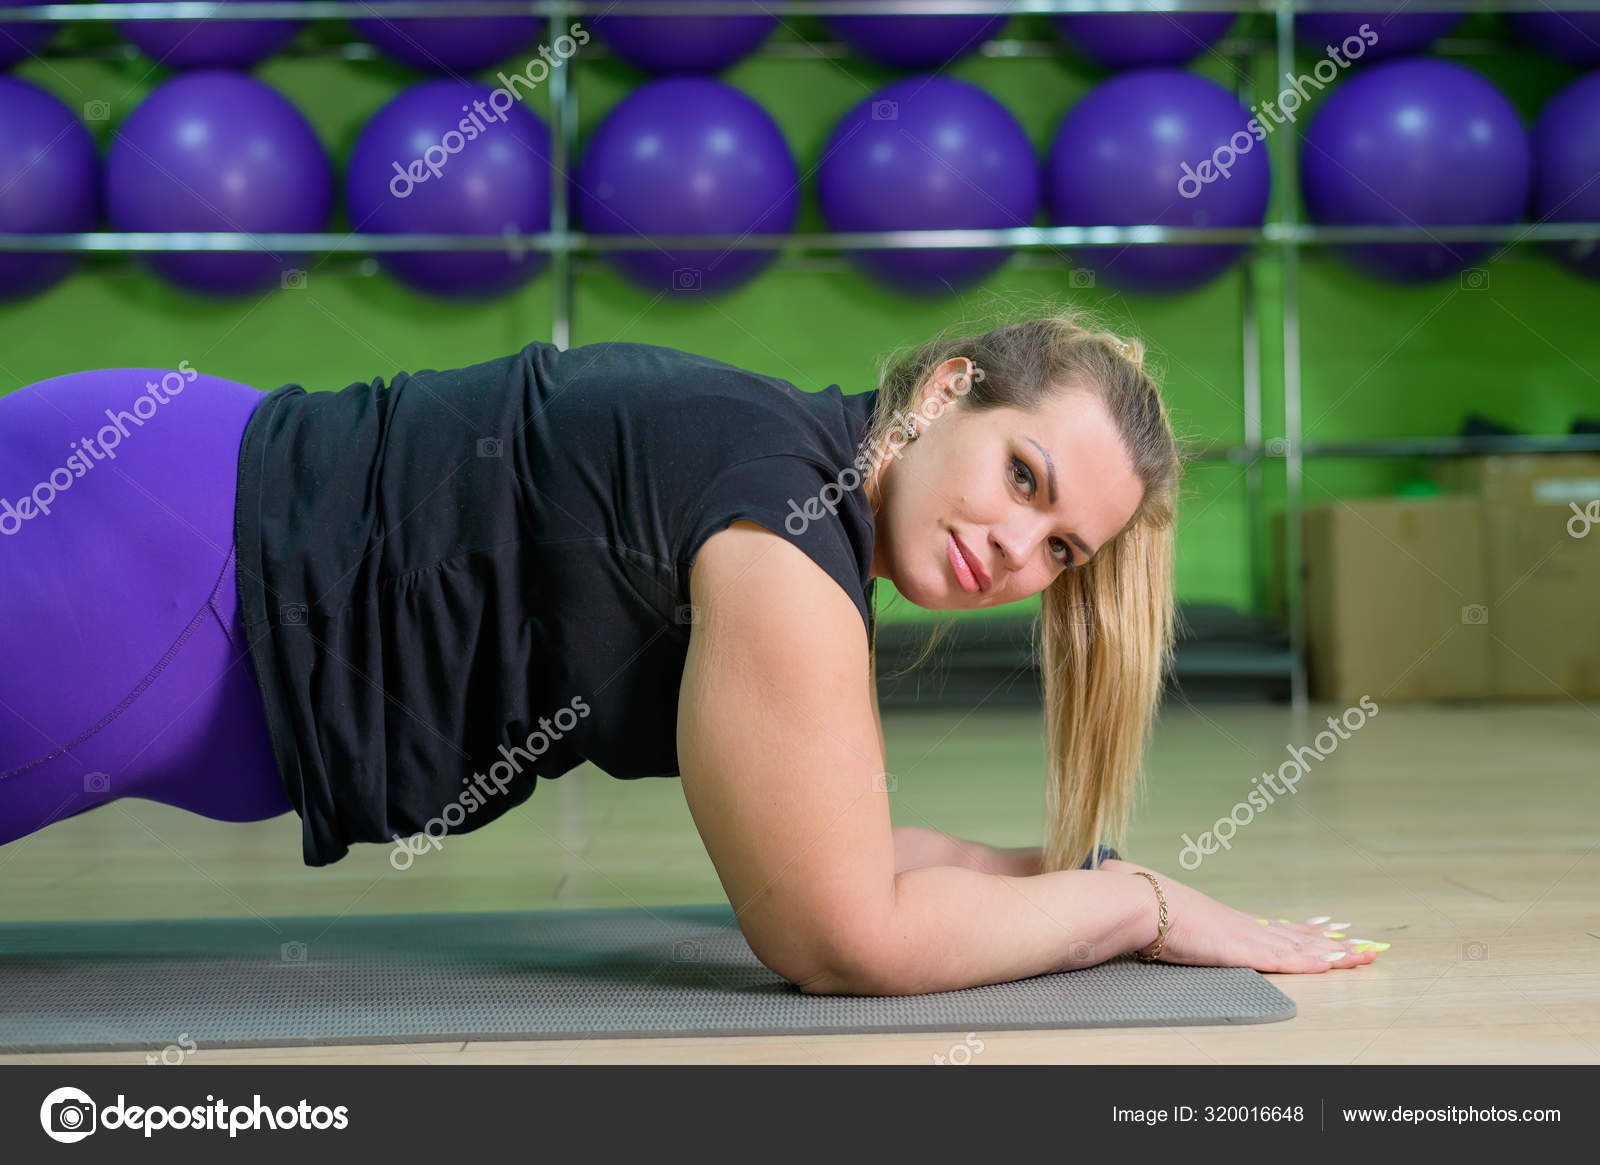 A fat woman is engaged in aerobics and trying to lose weight. An